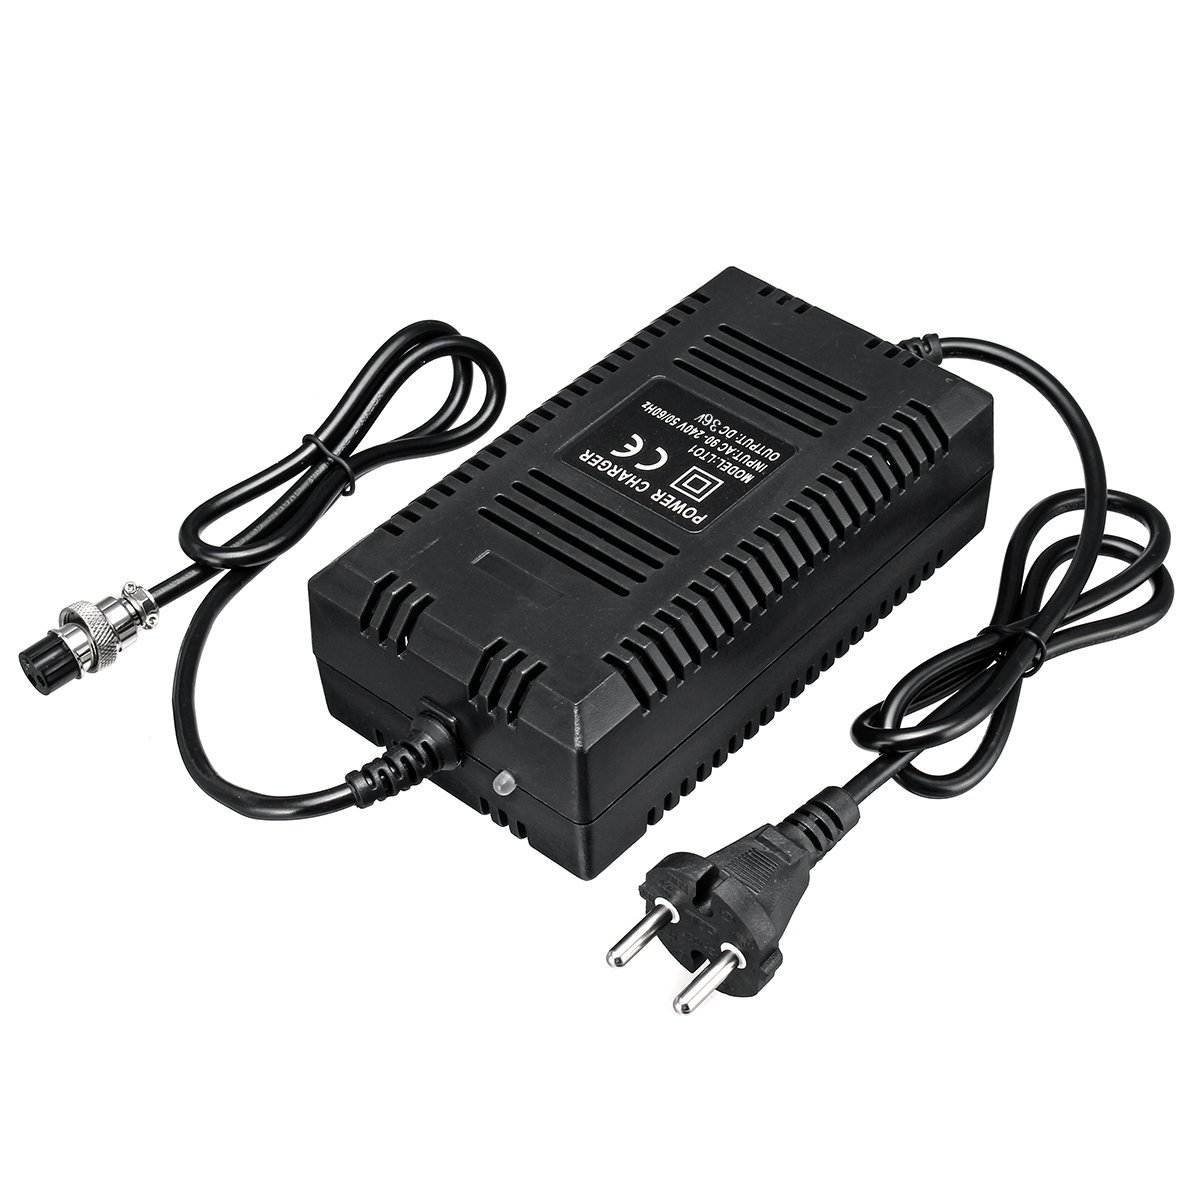 36V-18A-Lead-acid-Battery-Charger-Electric-Car-Vehicle-Scooter-Bicycle-Charger-1375553-7